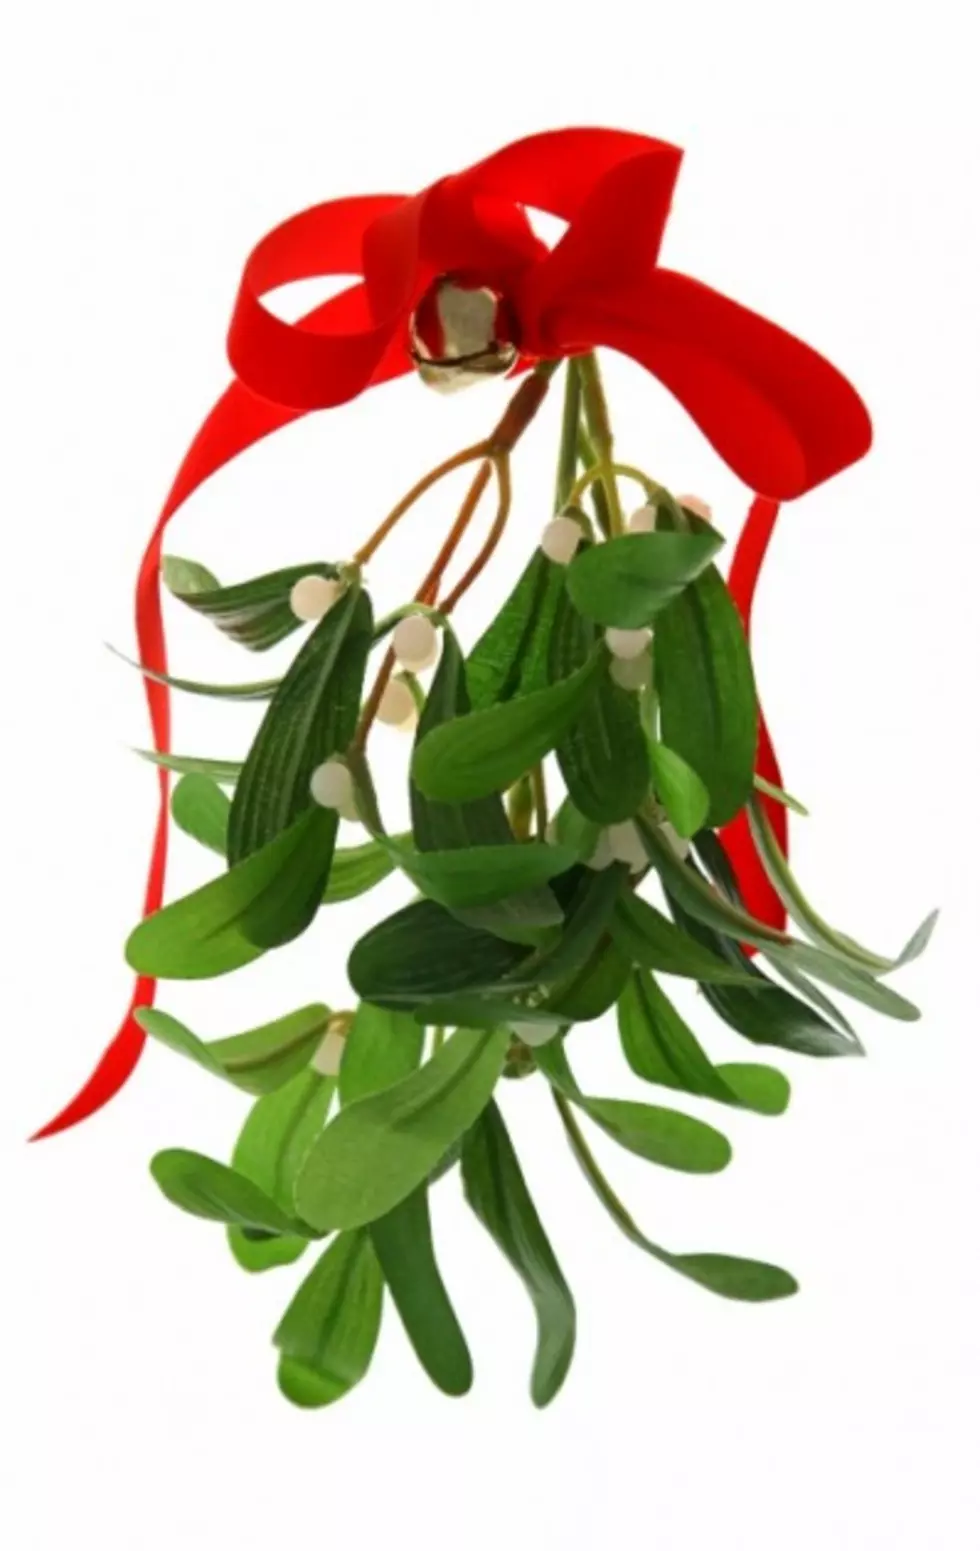 Pucker Up: Do You Have To Kiss Under The Mistletoe?